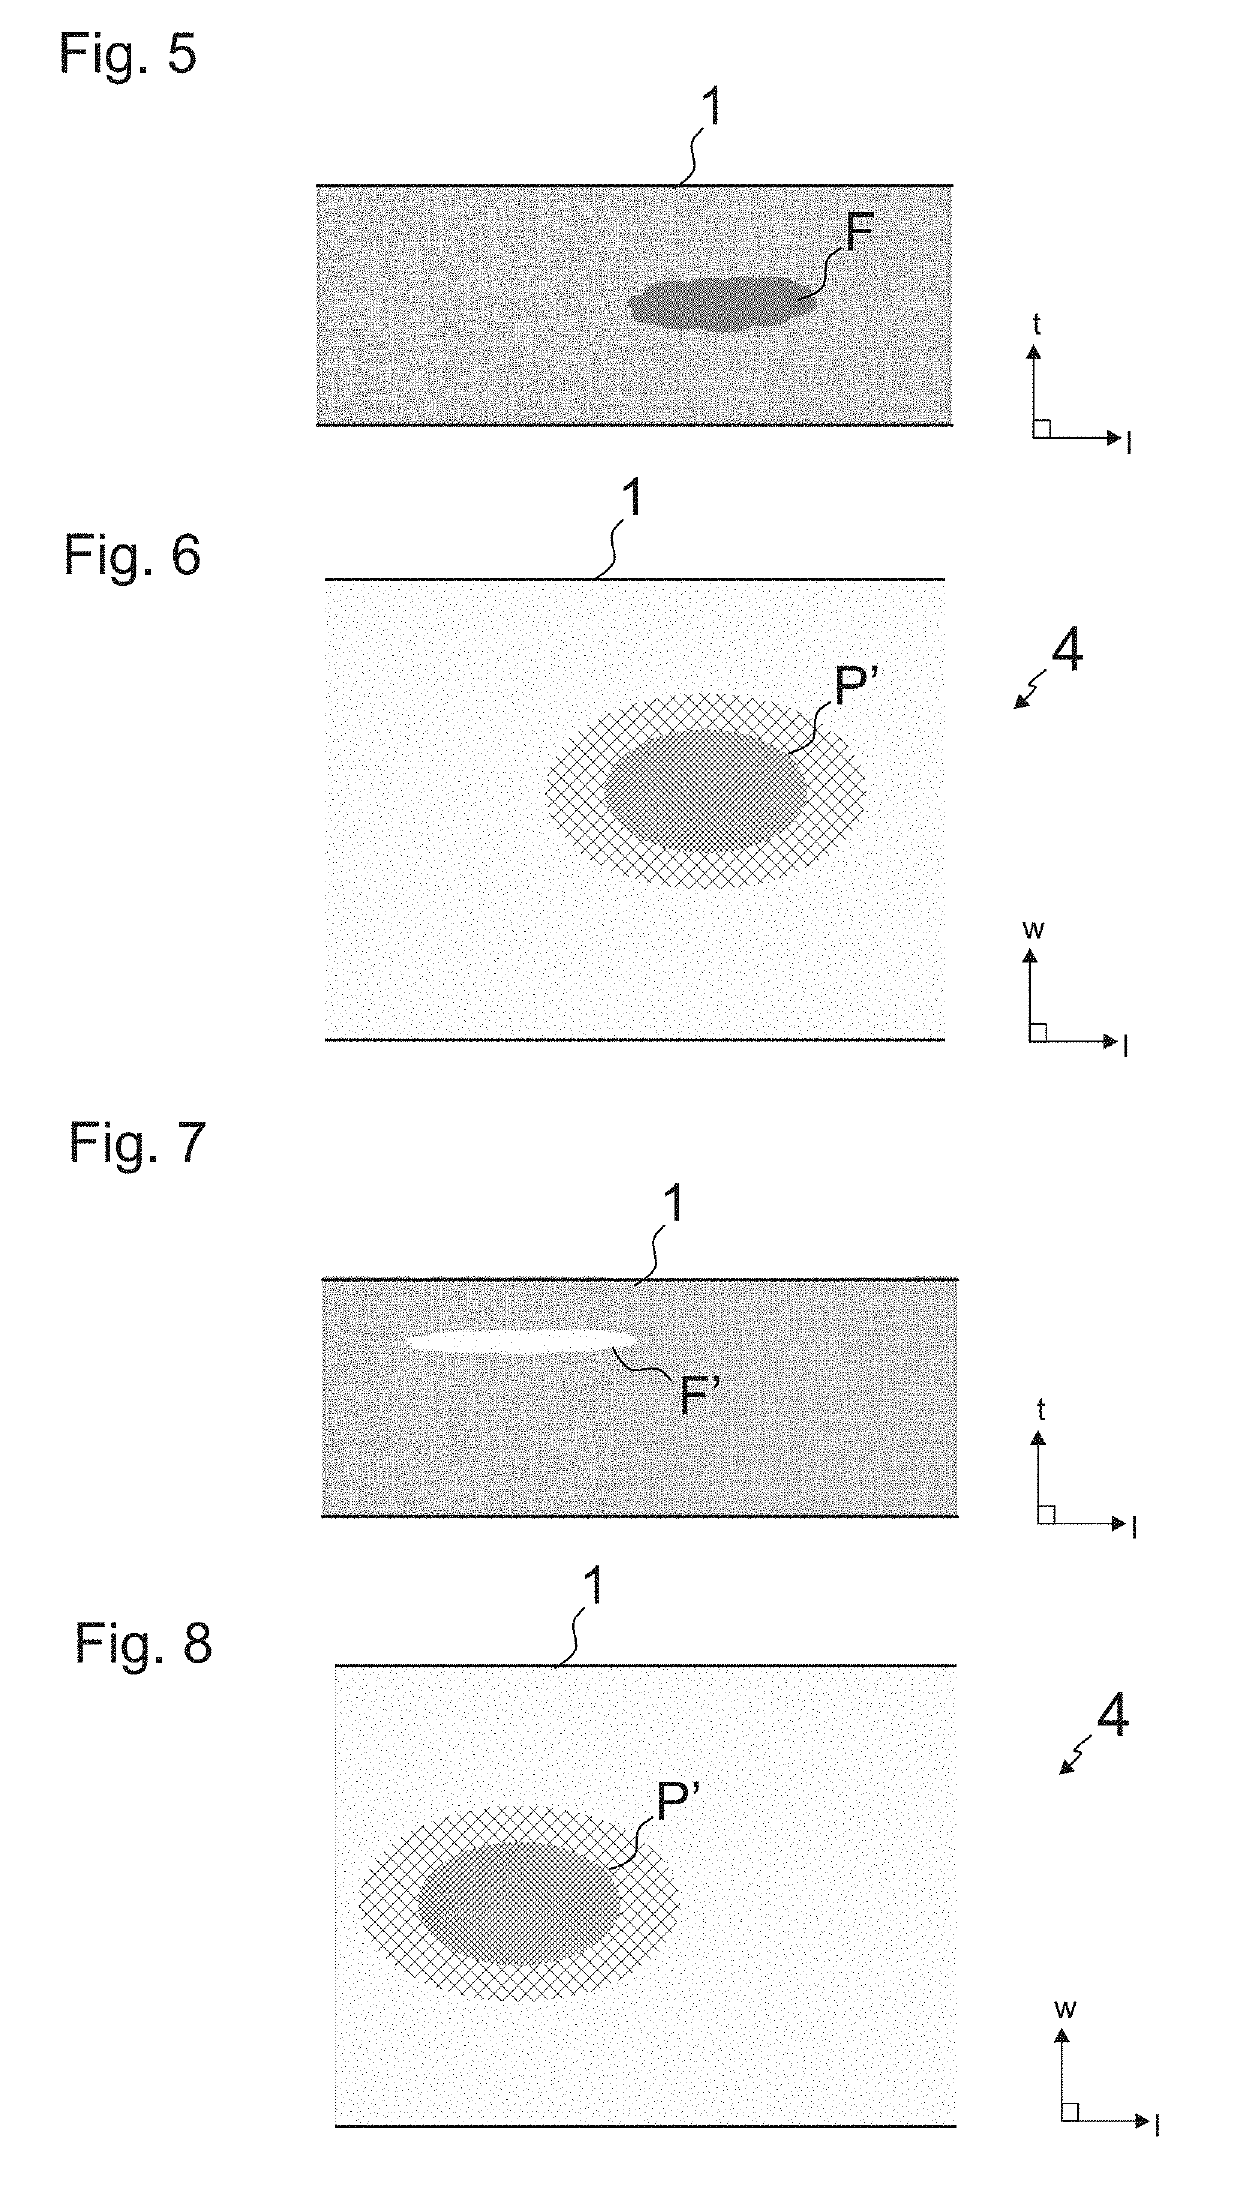 Method for checking the integrity of composite load bearing member